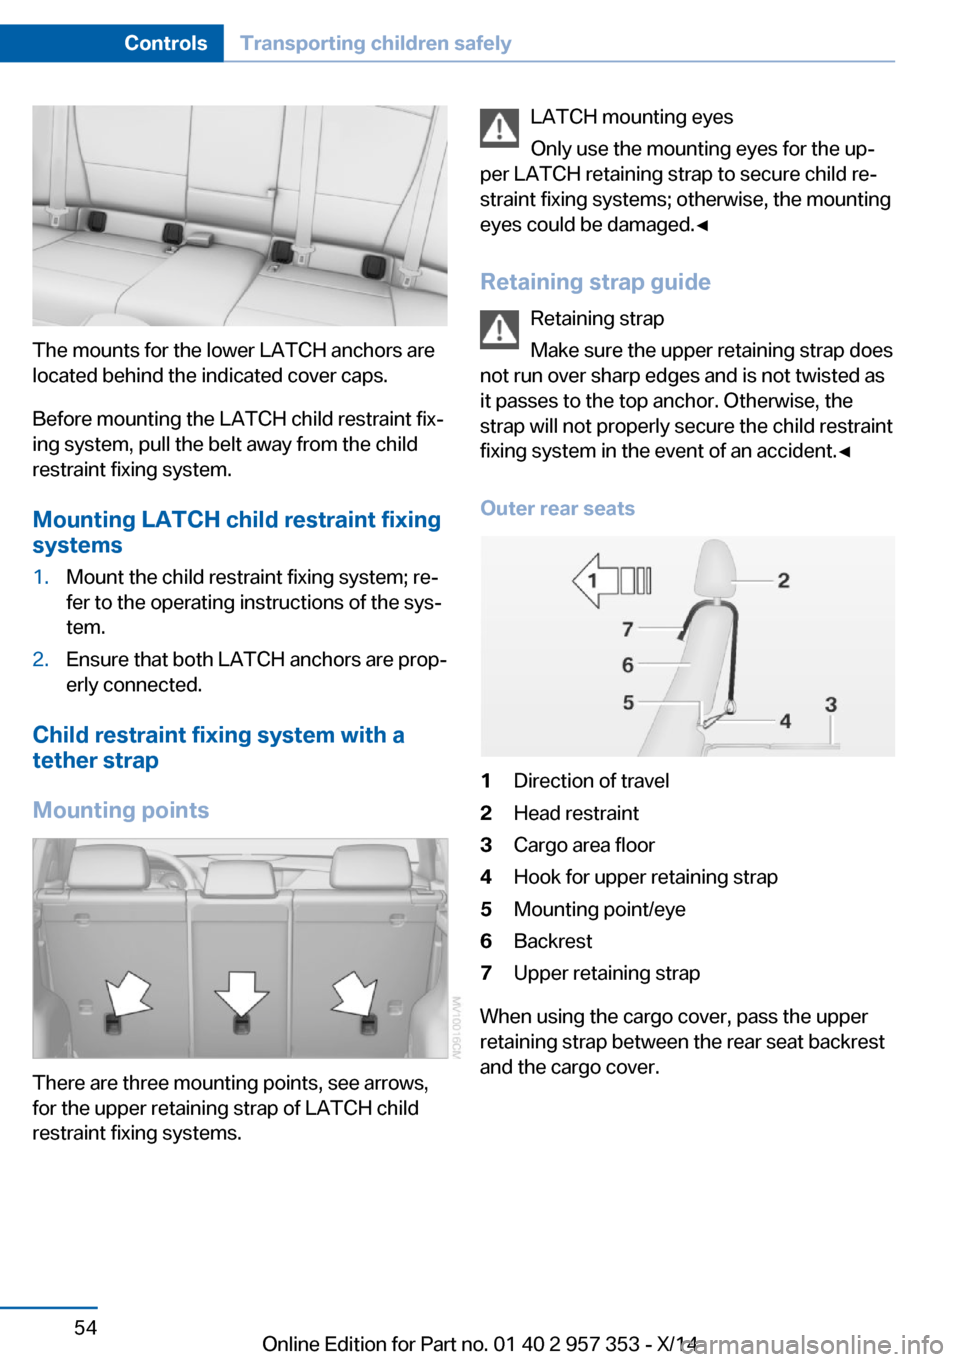 BMW X1 2014 E84 User Guide The mounts for the lower LATCH anchors are
located behind the indicated cover caps.
Before mounting the LATCH child restraint fix‐
ing system, pull the belt away from the child
restraint fixing syst